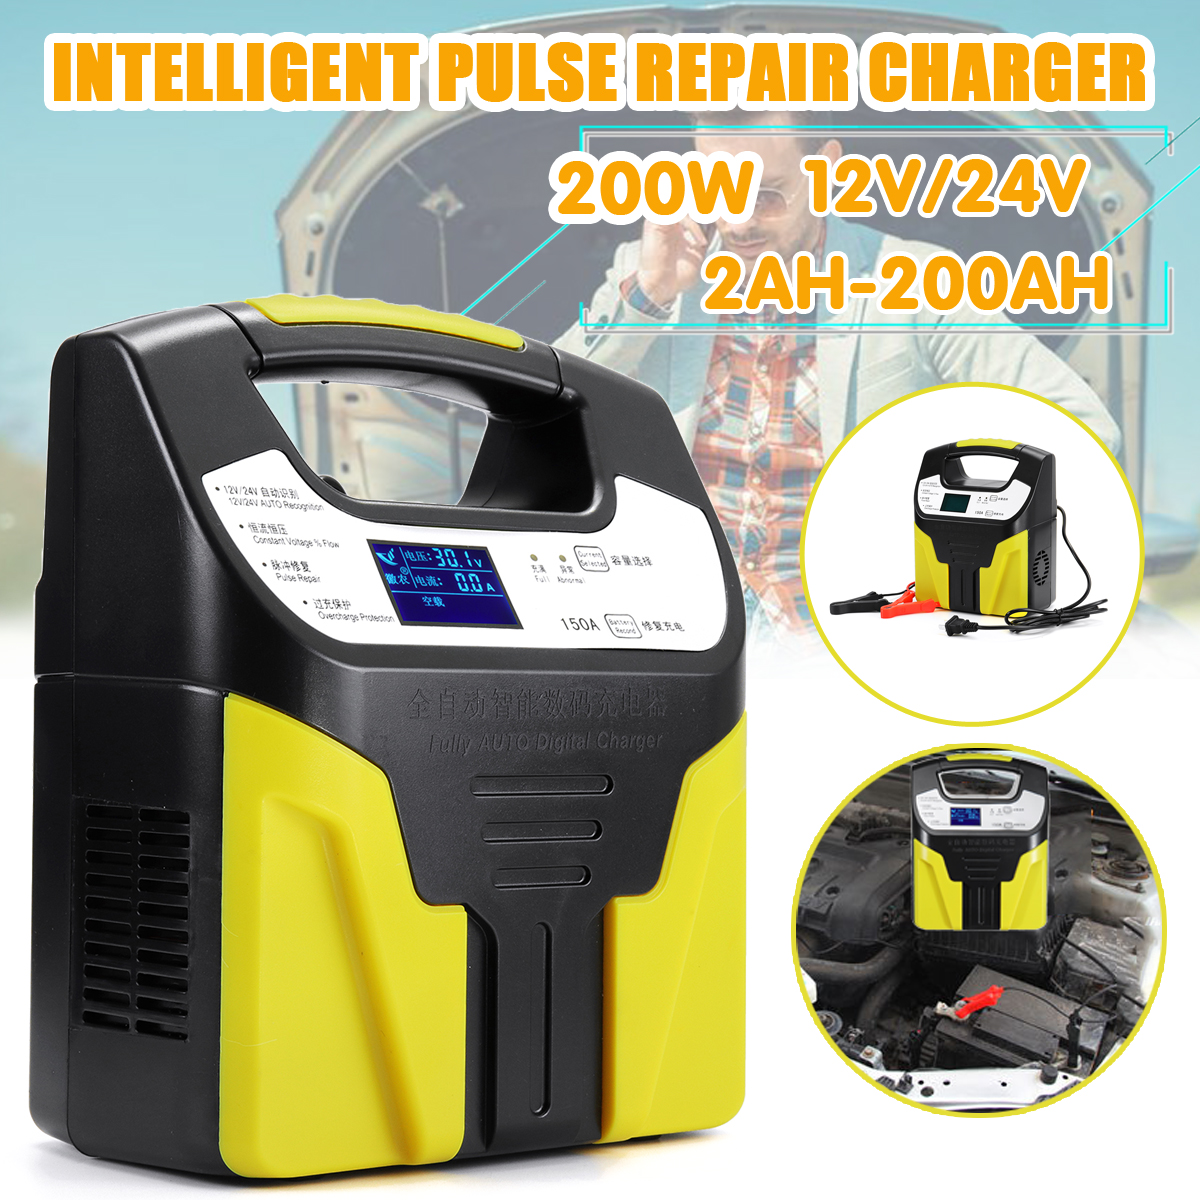 220V-200W-Digital-Full-Automatic-Electric-Battery-Charger-Intelligent-Pulse-Repair-1387859-1